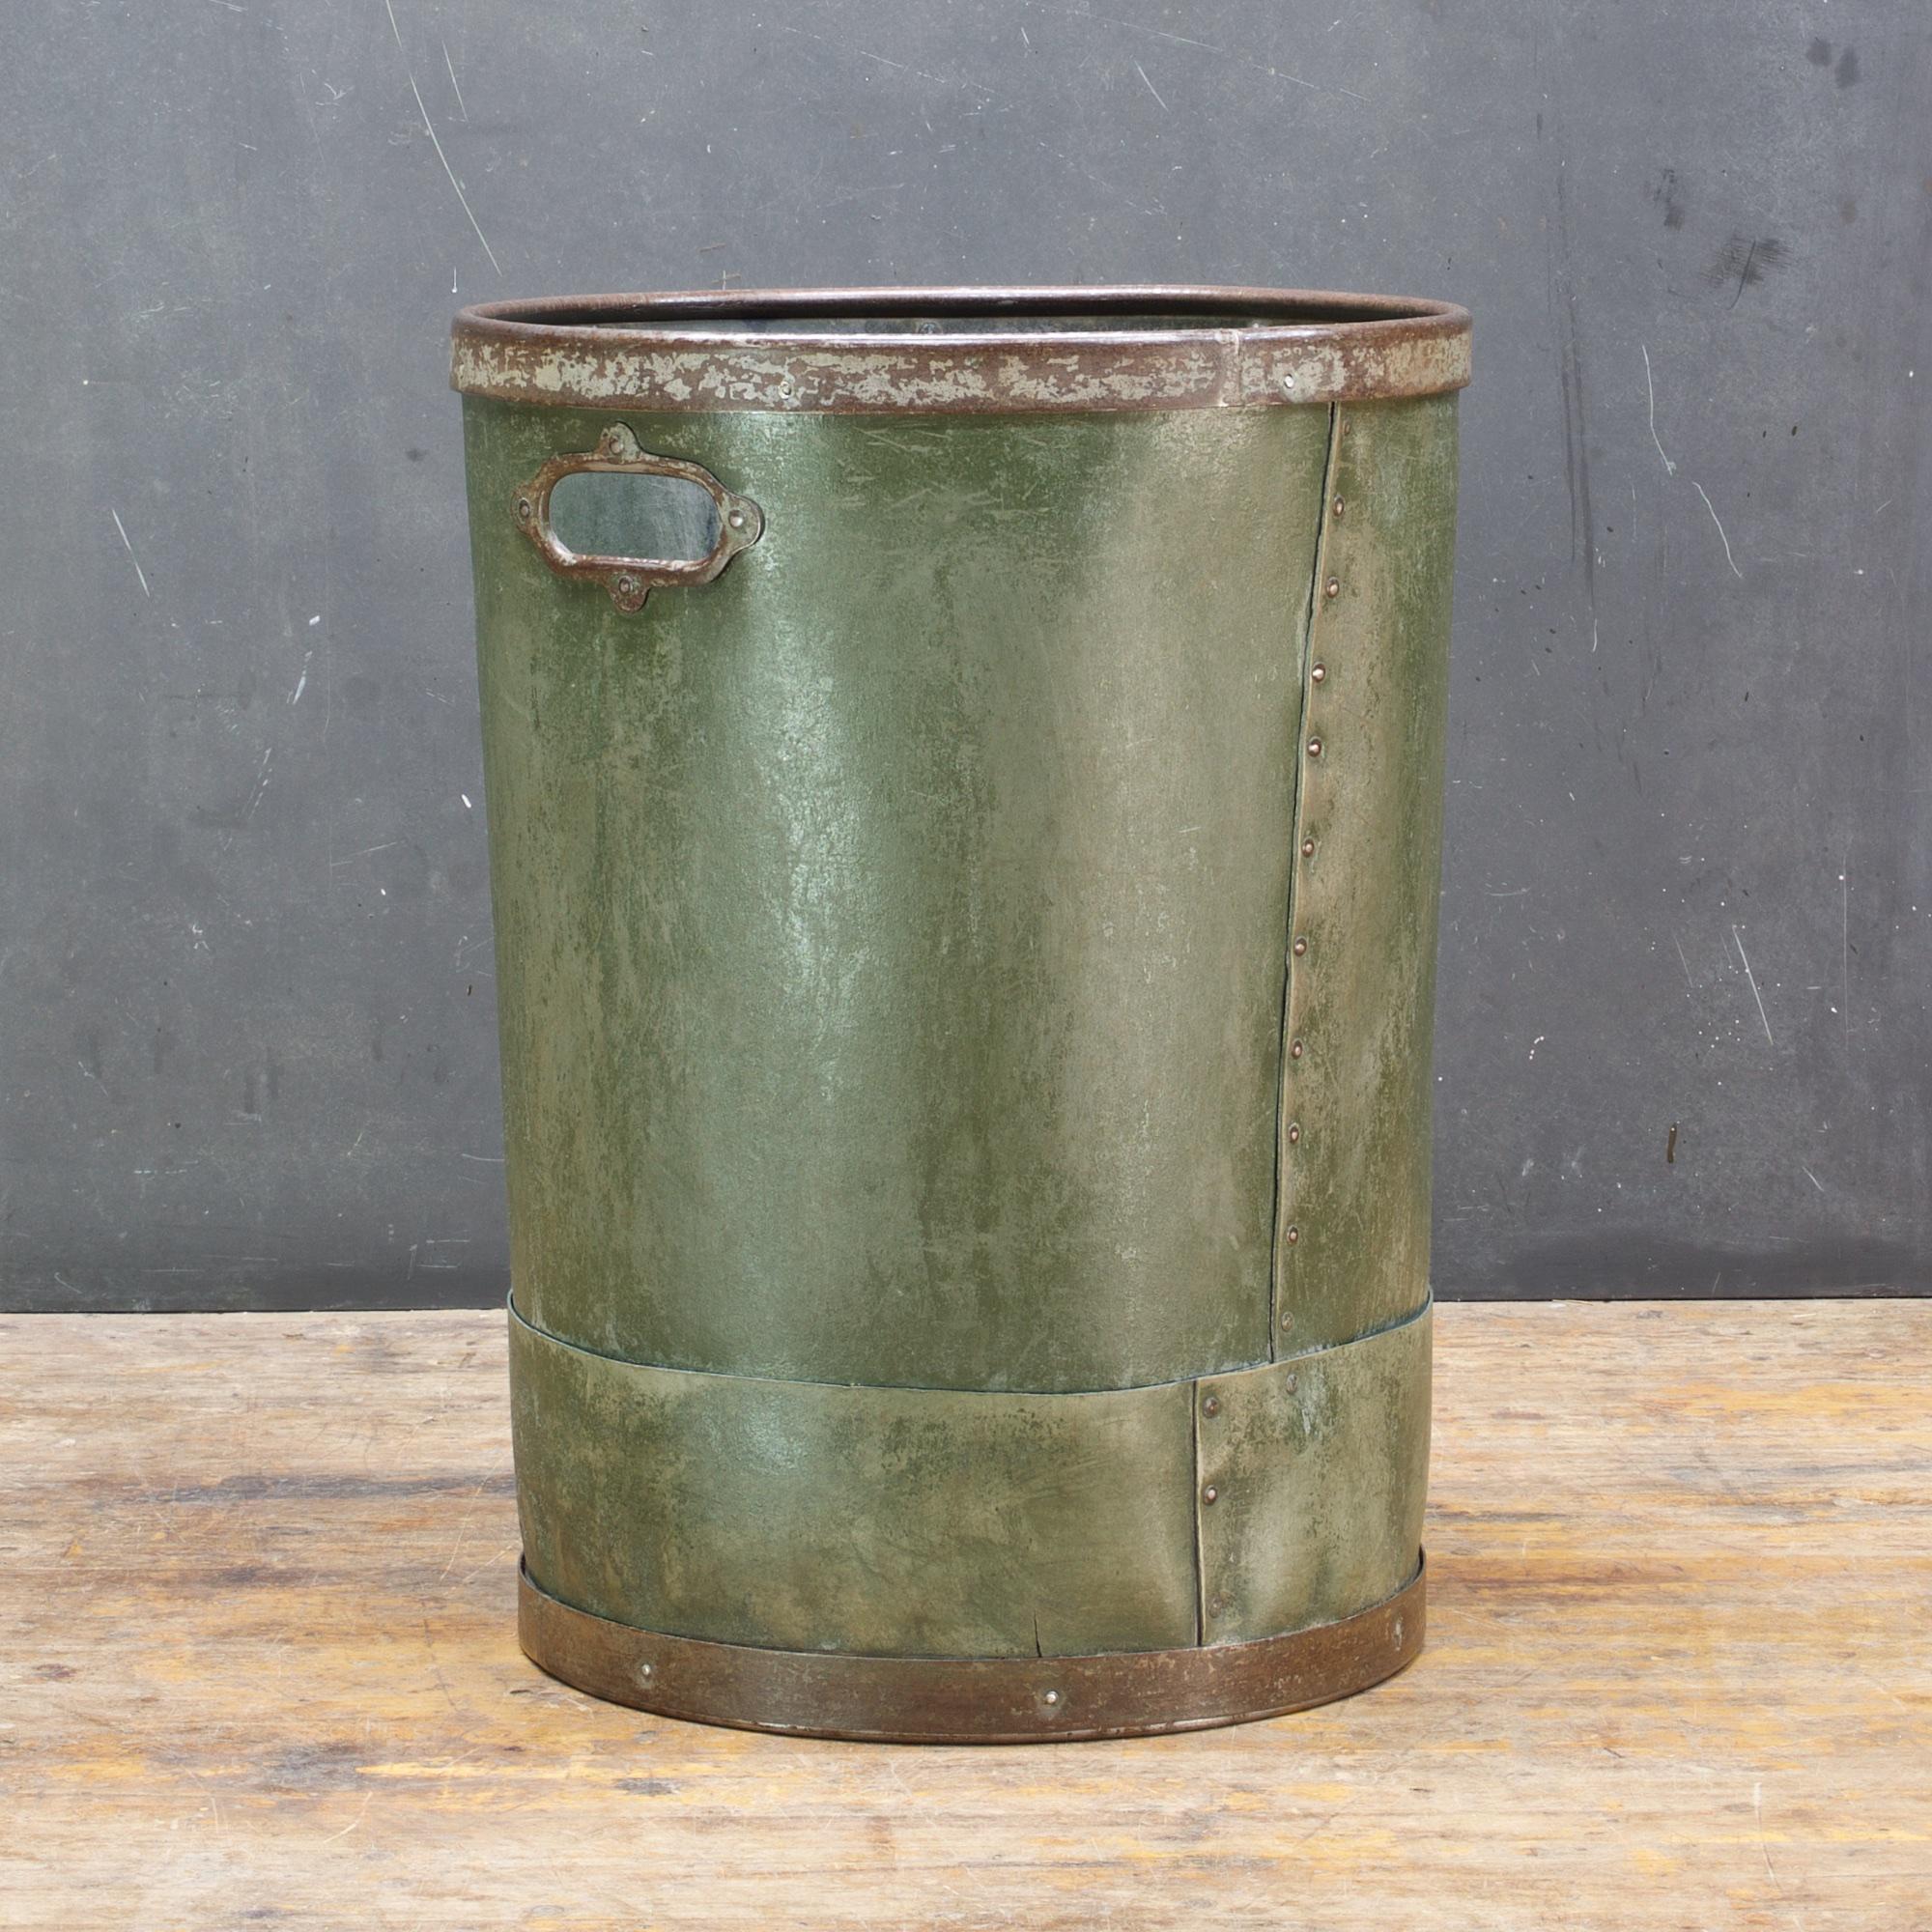 Large Industrial waste bin for office/home use. Riveted green wastebasket/trash-can made in Long Island City New York. Rim, handle and bottom are metal, good weight, heavy fibre material.